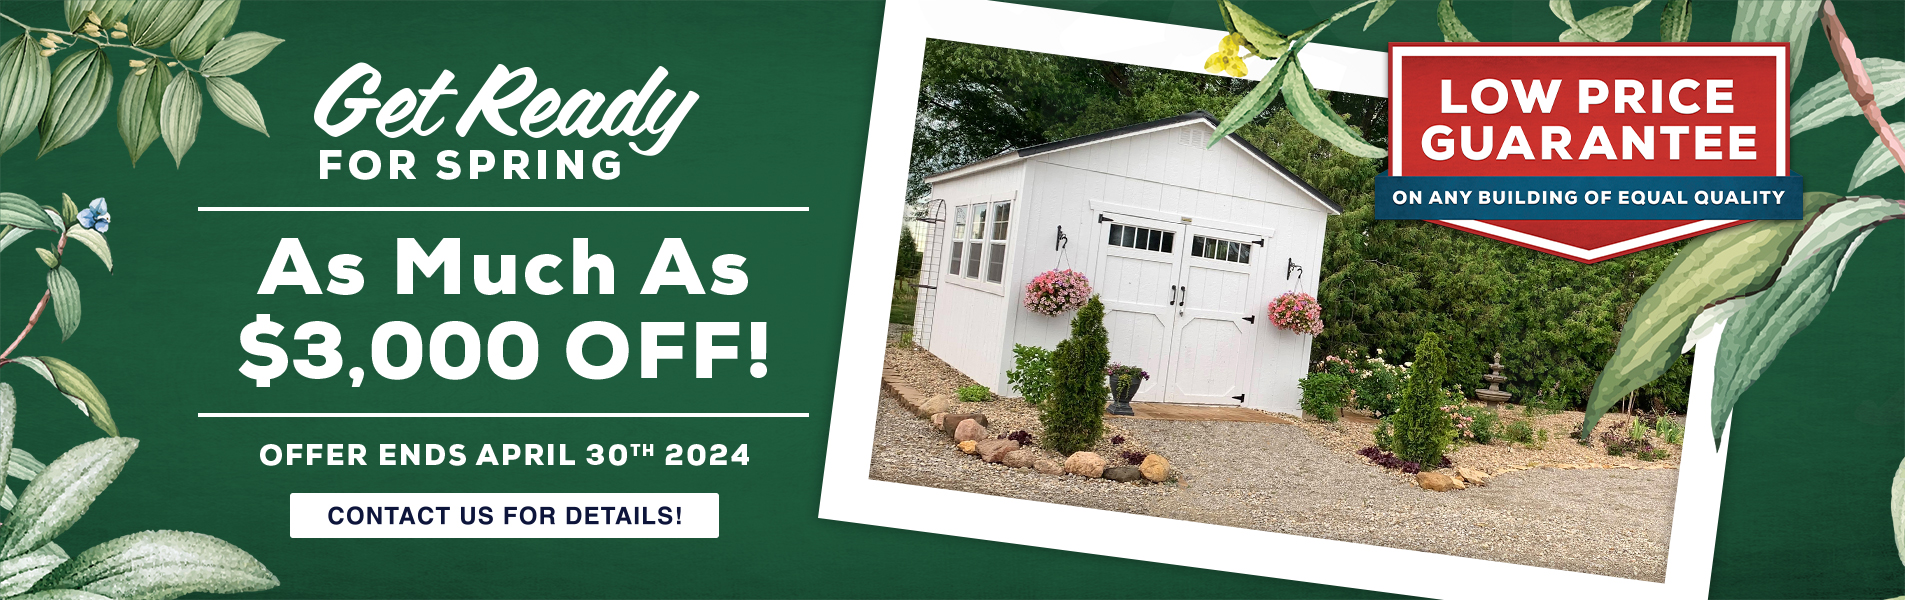 April Spring Savings Sales Event for shed sales at French Creek Shed Sales in Casper, WY Sheds up to $3000.00 off!